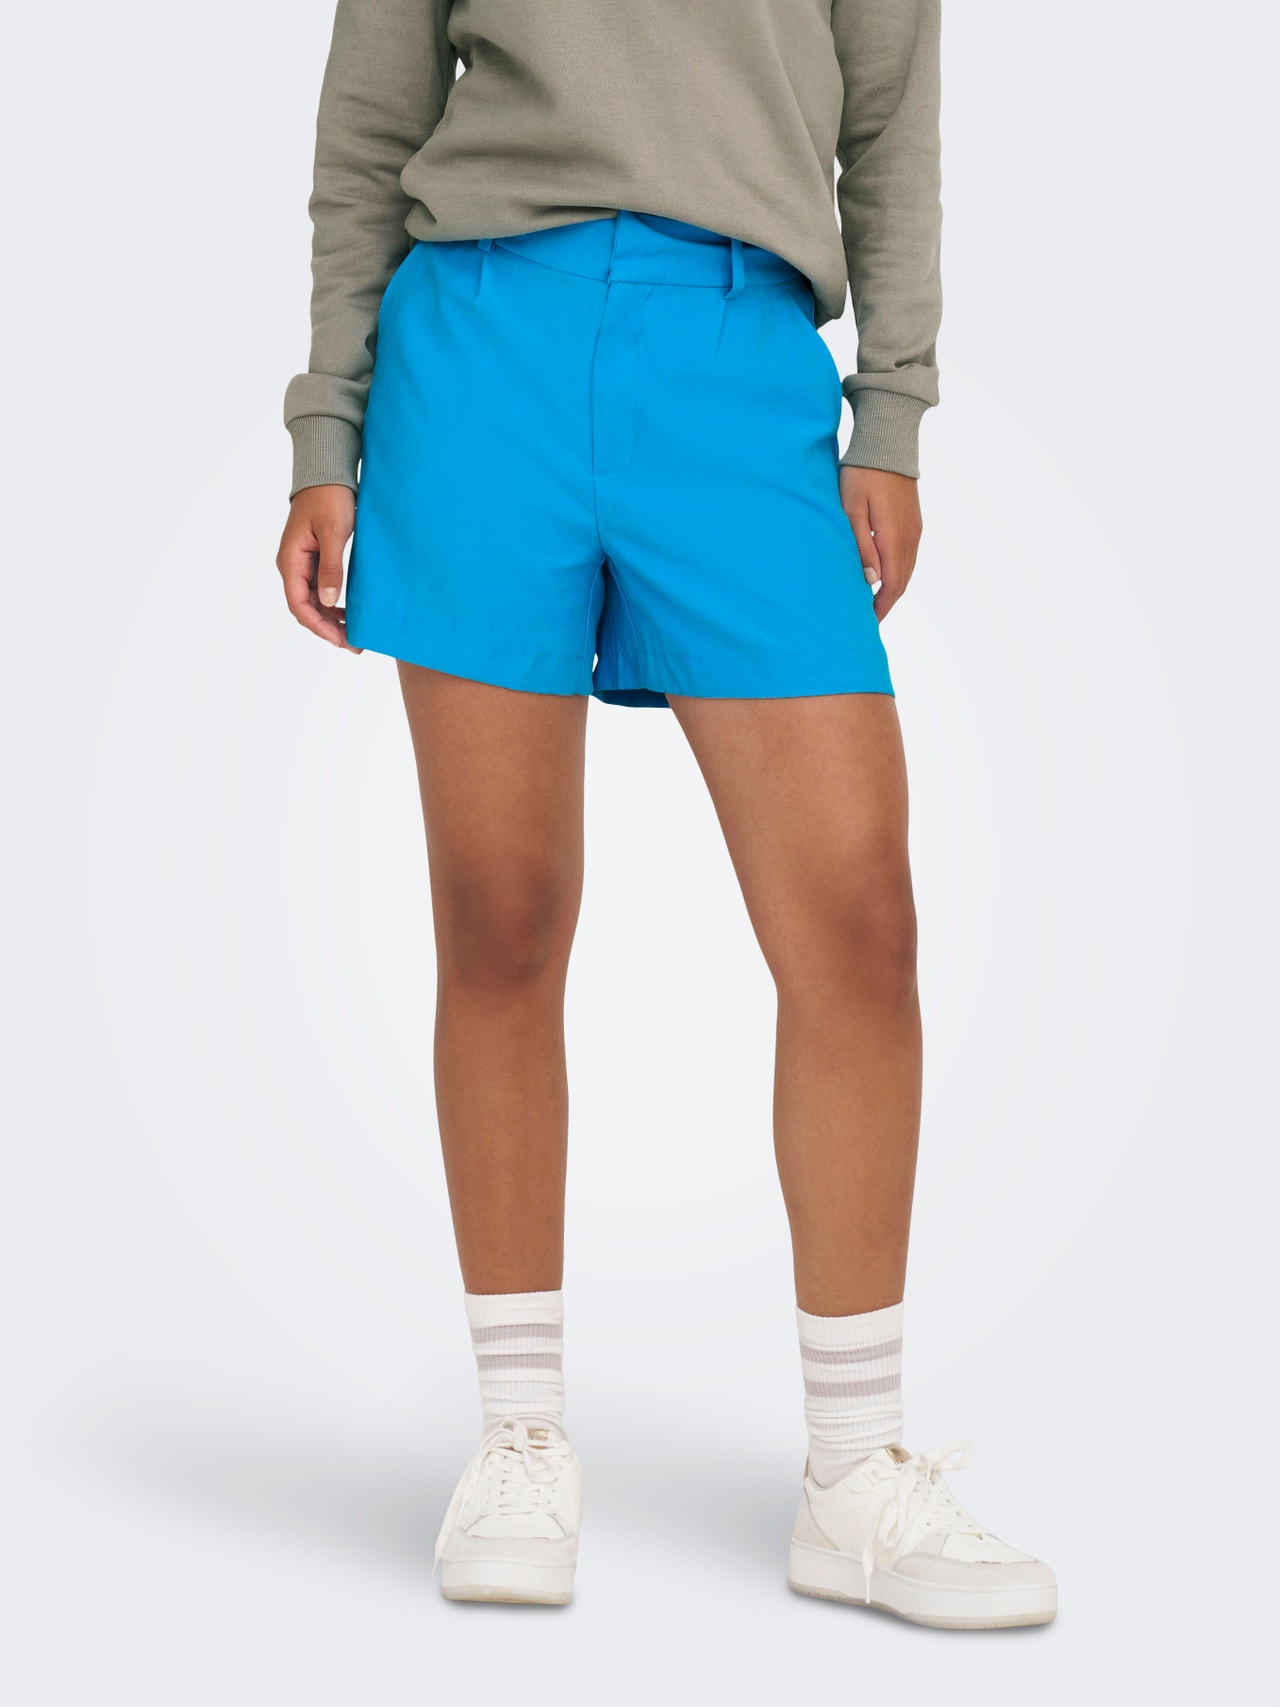 ONLY Loose shorts with high waist -Dresden Blue - 15295616